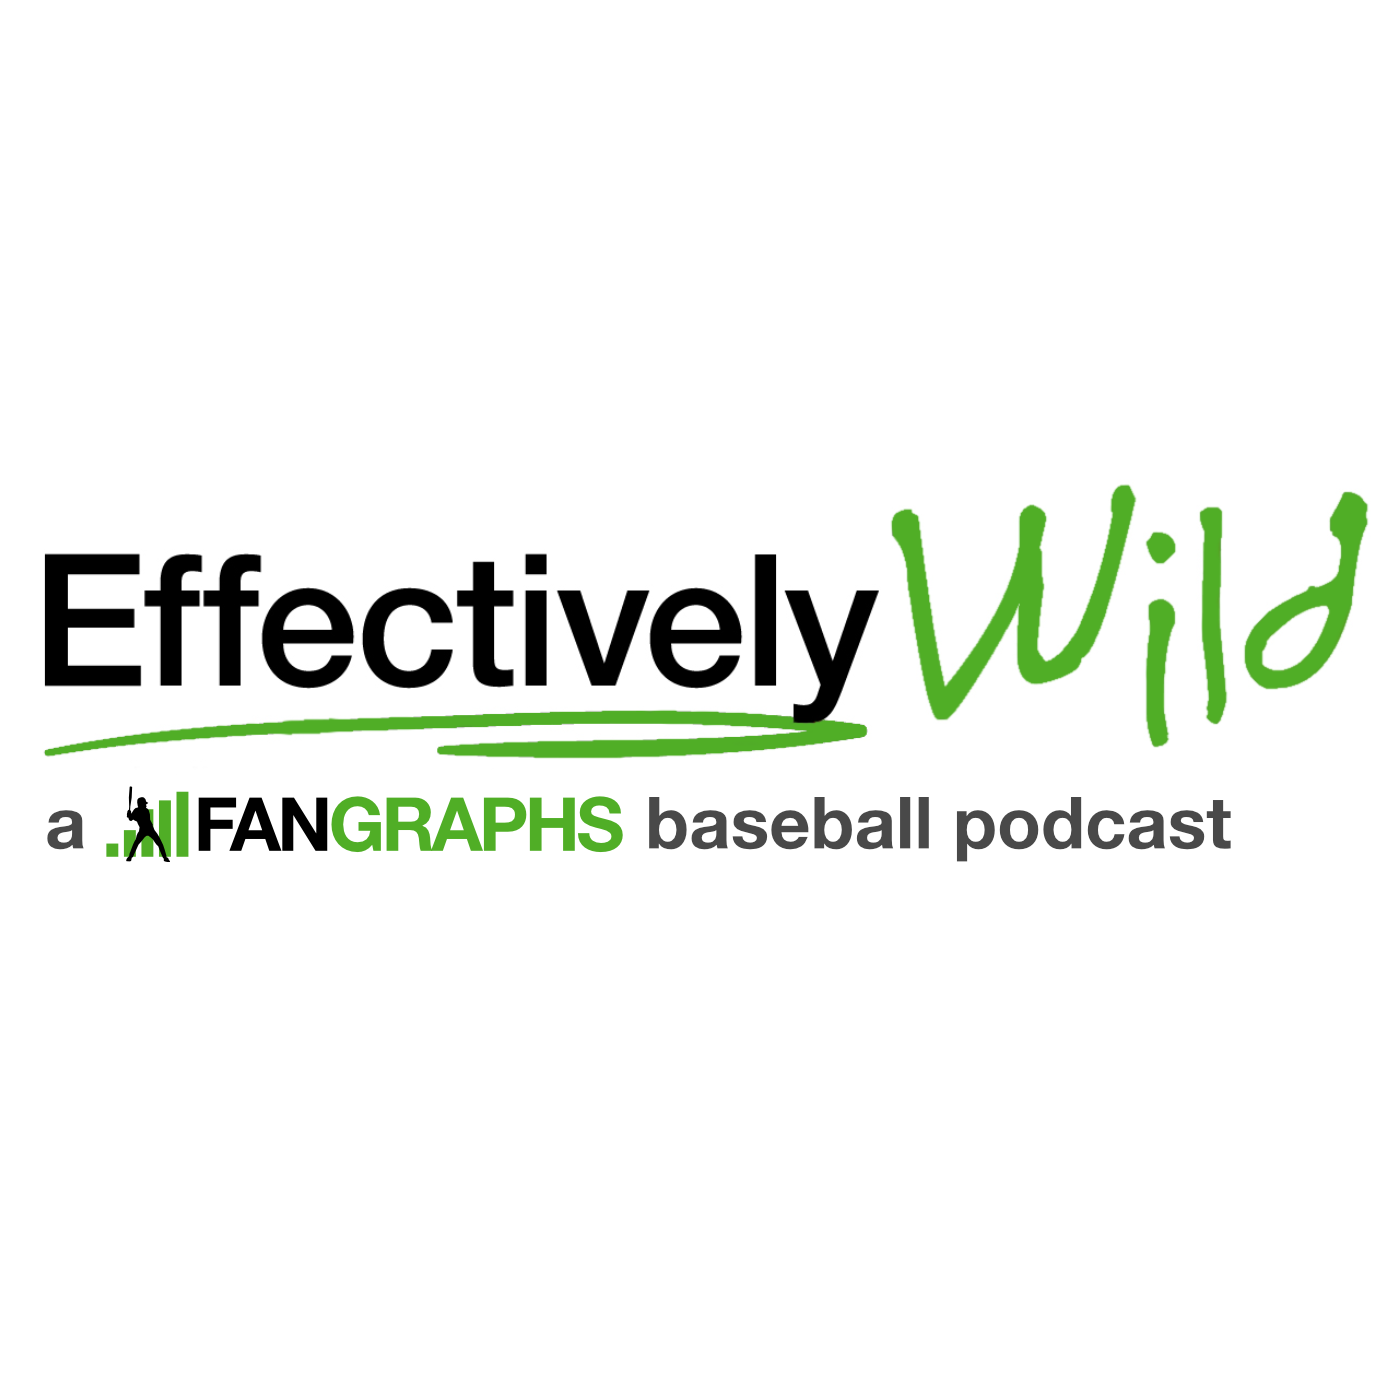 A highlight from Effectively Wild Episode 1884: The Great Trade Deadline Download